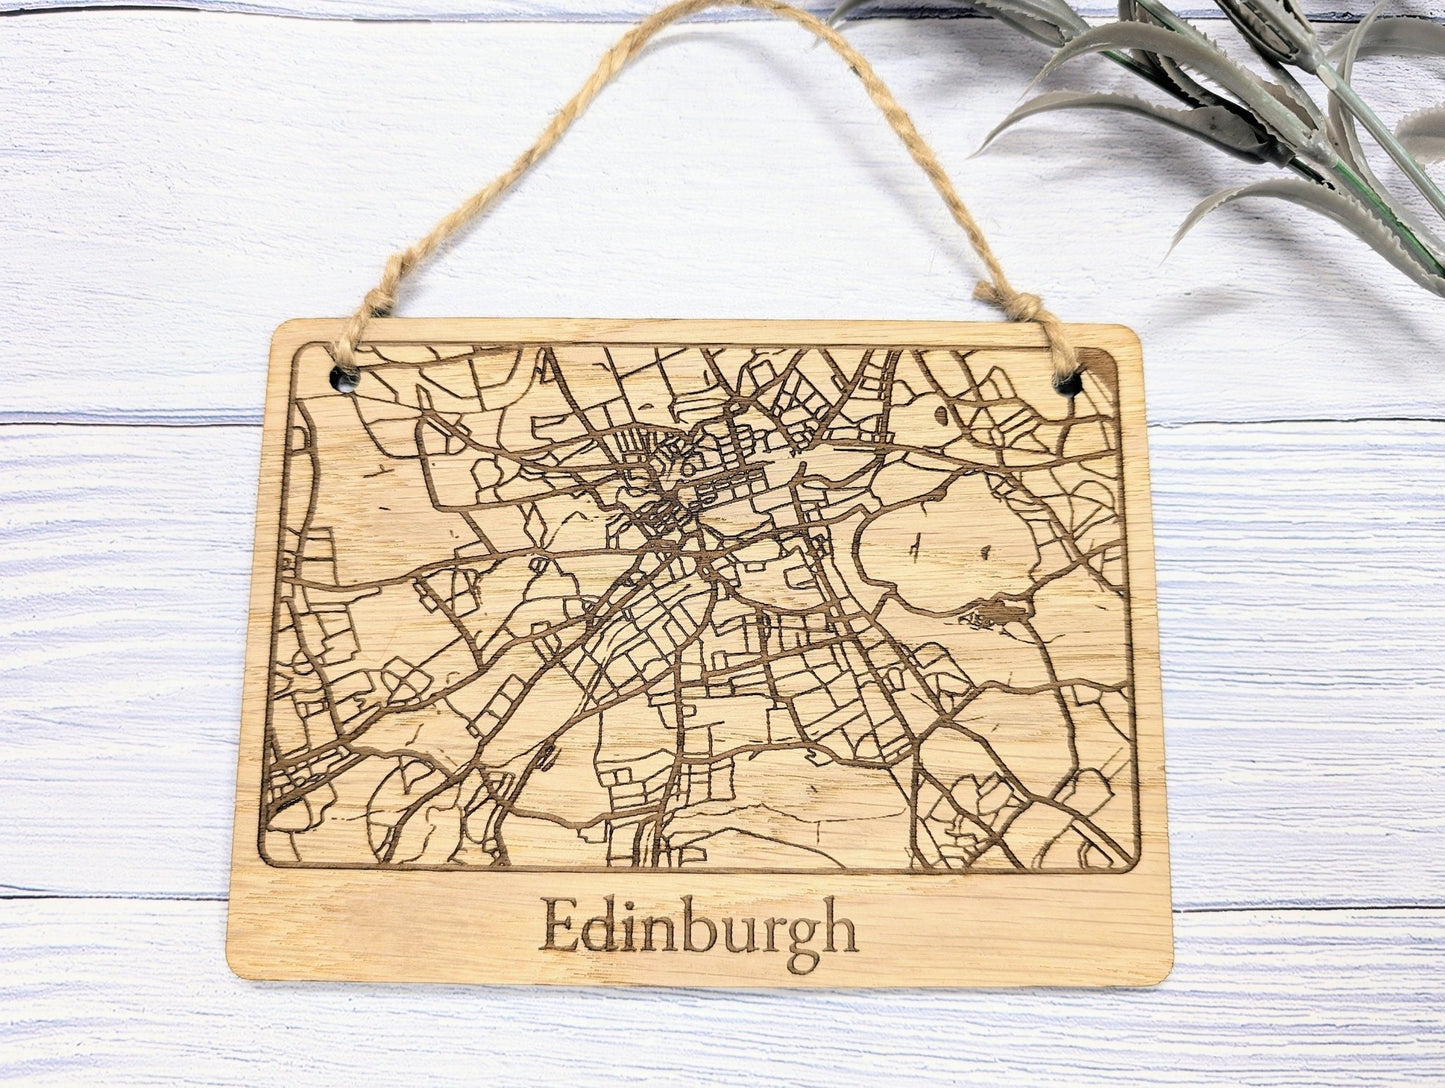 Handcrafted Wooden Map Wall Art of Edinburgh, UK - Available in 4 Sizes - Perfect Home Decor or Unique Gift - CherryGroveCraft